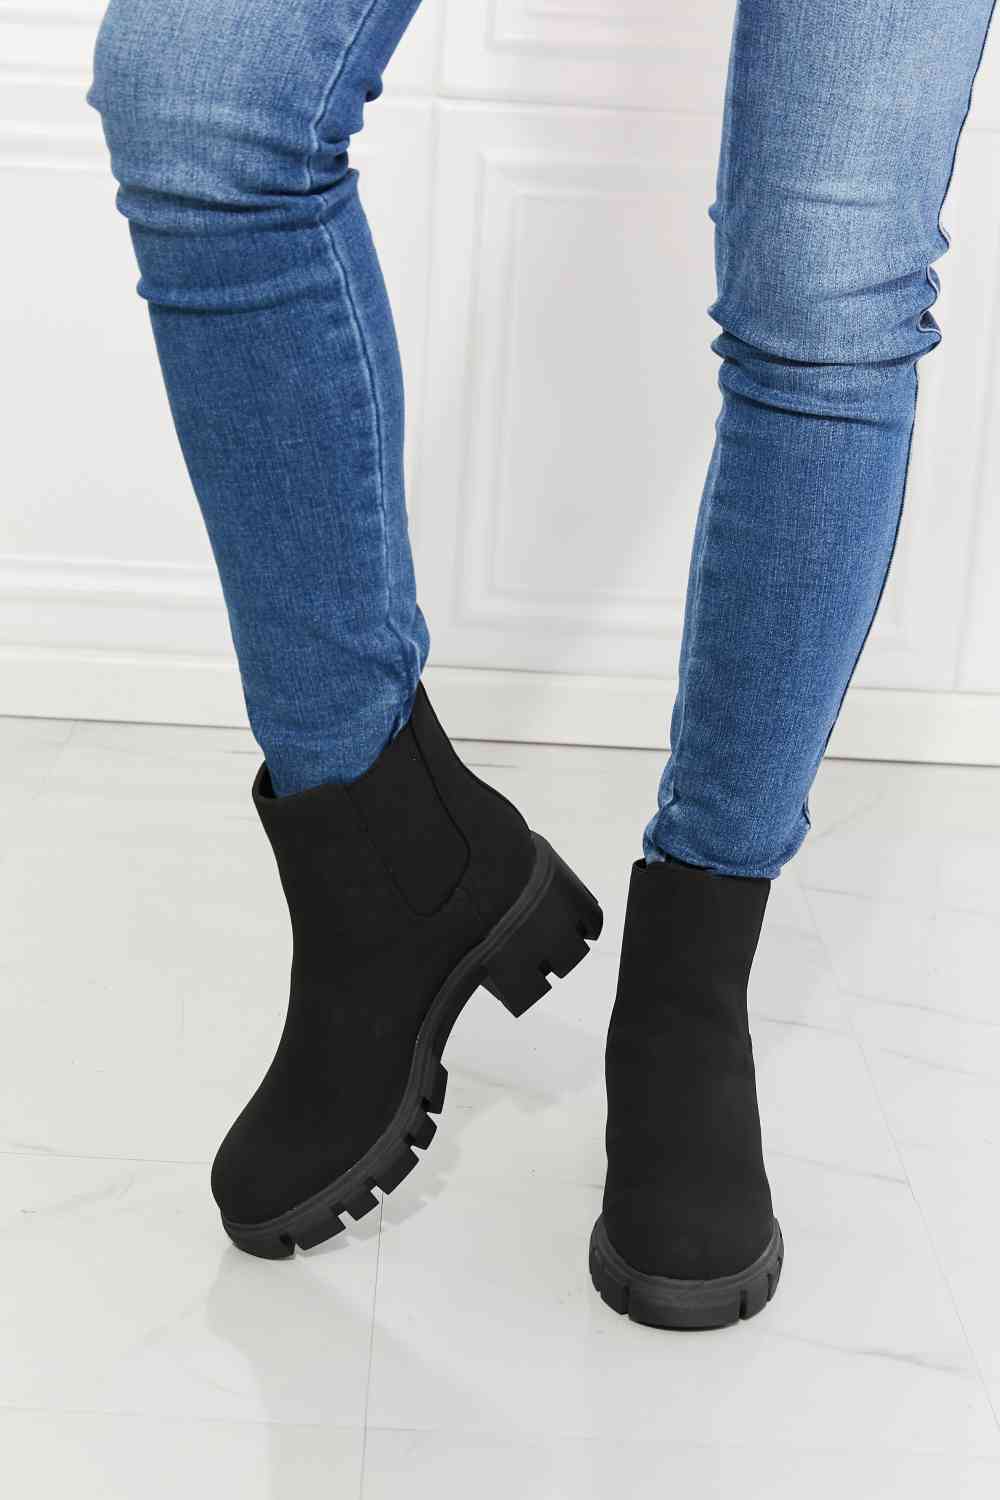 MMShoes Work For It Matte Lug Sole Chelsea Boots in Black - lolaluxeshop